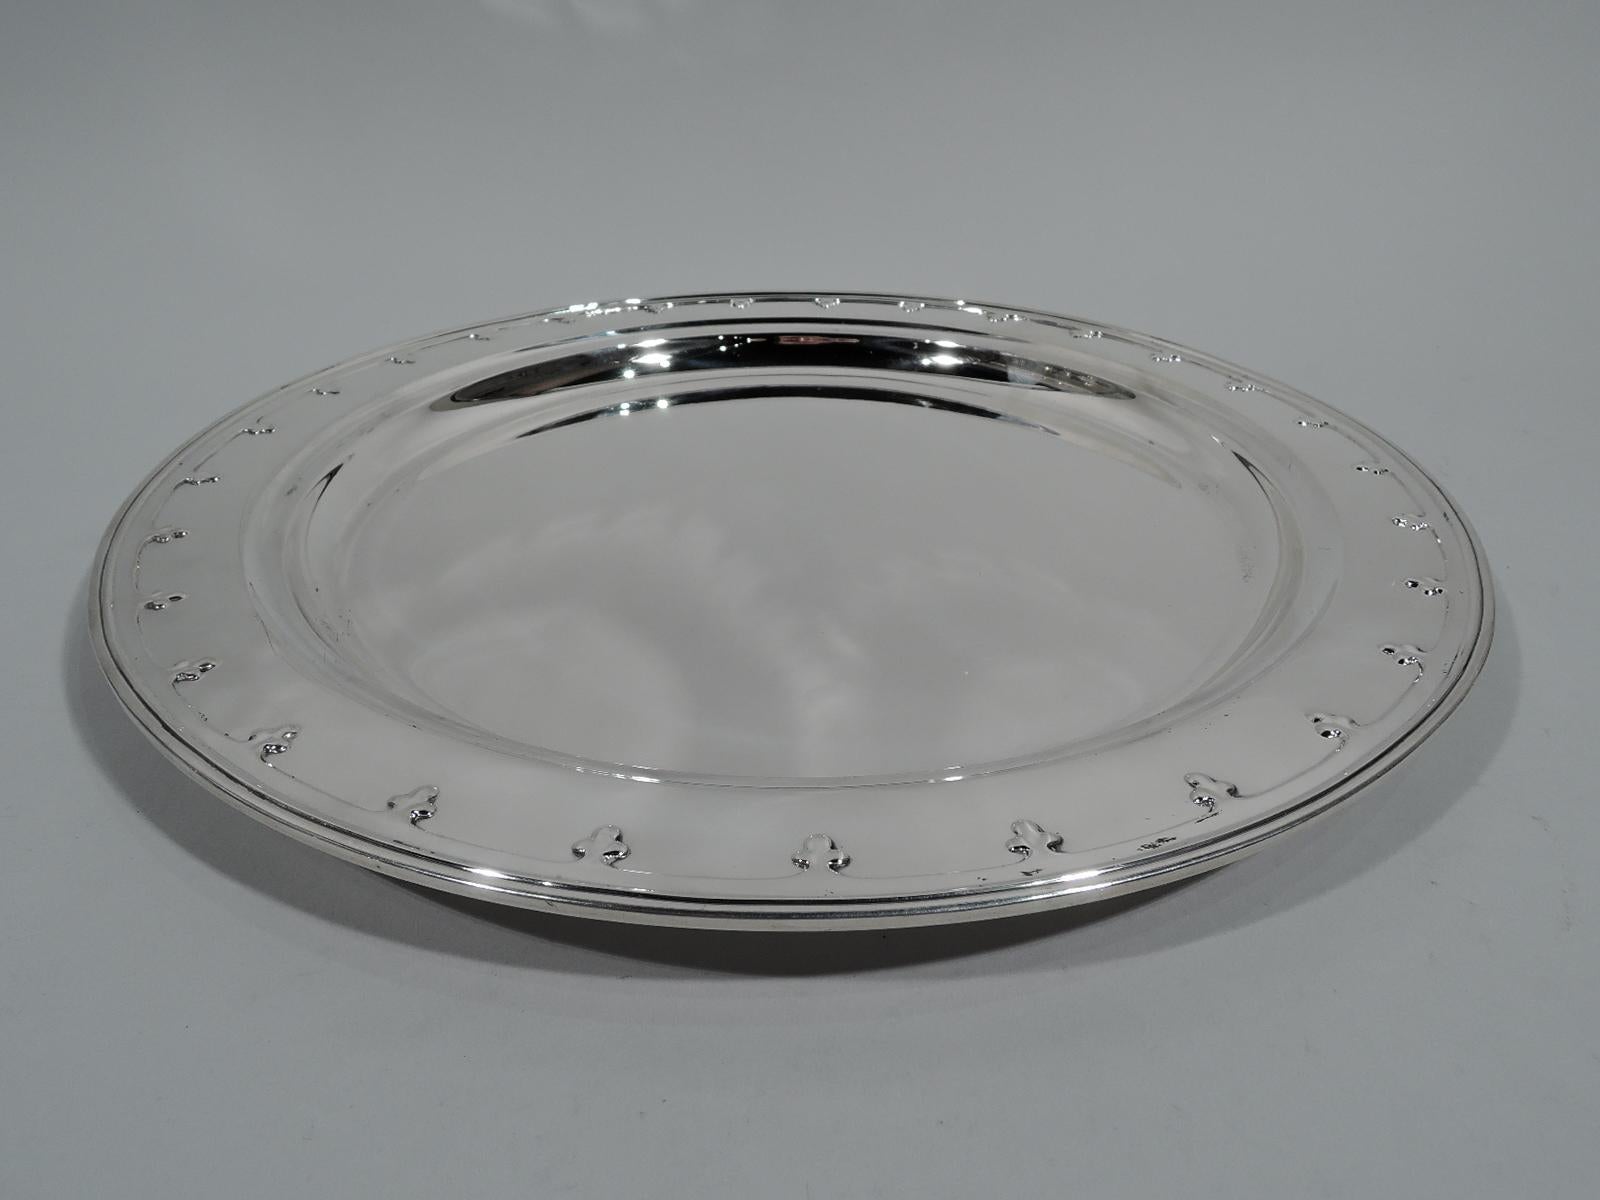 Saint Dunstan sterling silver tray. Made by Tiffany & Co. in New York, circa 1910. Round and deep well. Wide shoulder with applied fleur-de-lys border, and reeded rim. Fully marked including pattern no. 16471 and director’s letter m. Heavy weight: